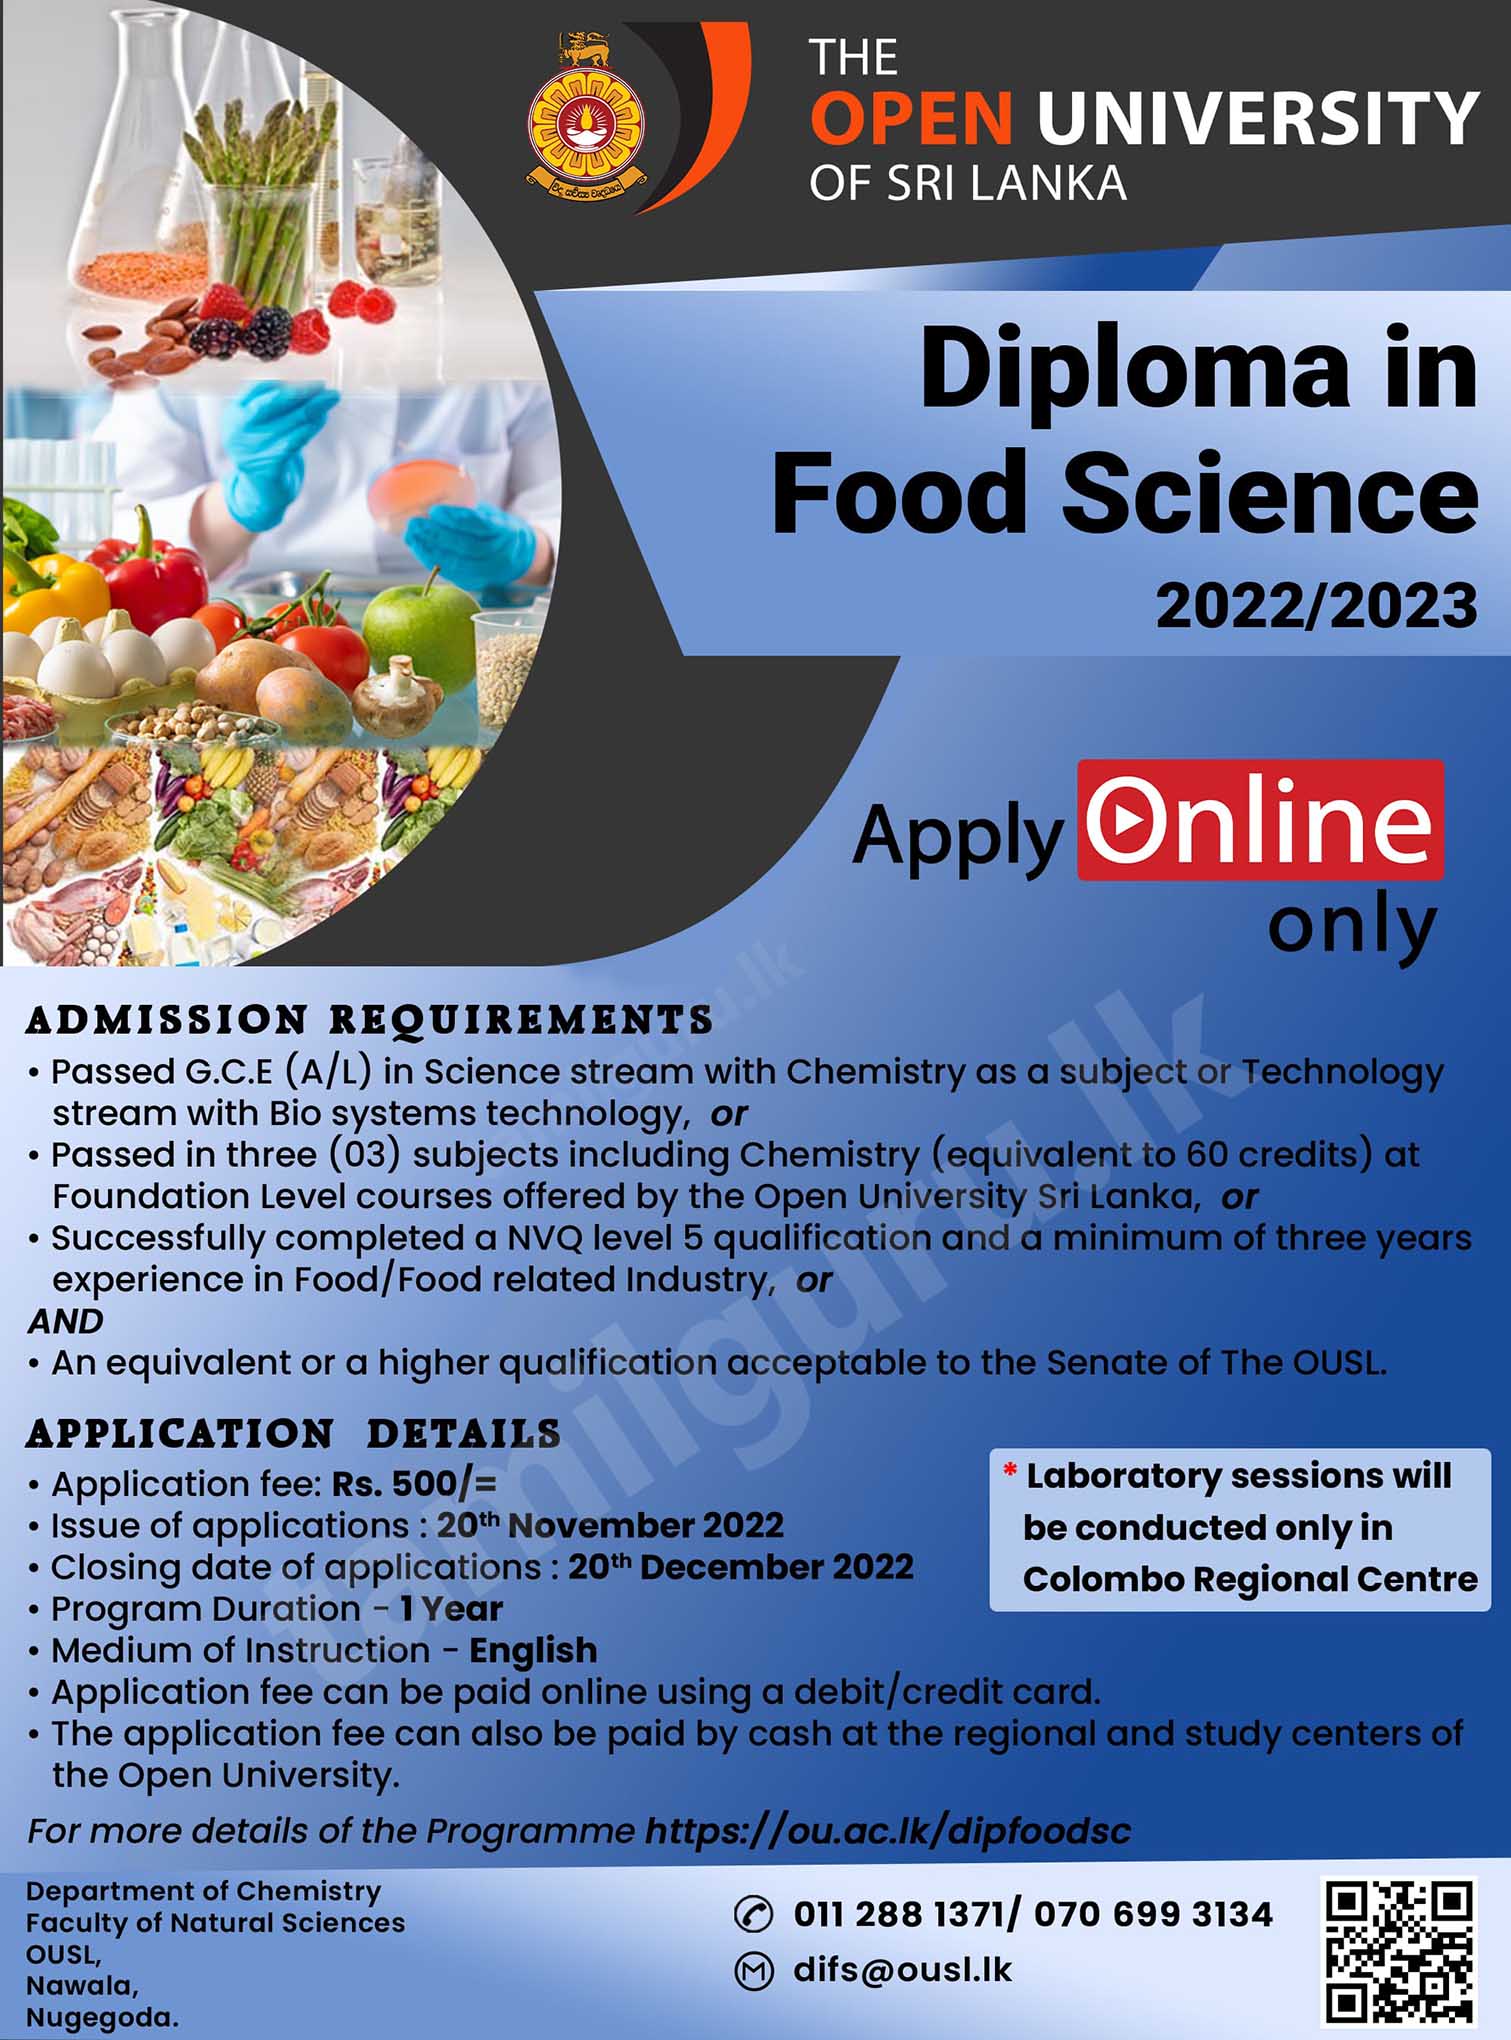 Calling Applications for Diploma in Food Science (Course) 2022/2023 - Open University of Sri Lanka (OUSL)